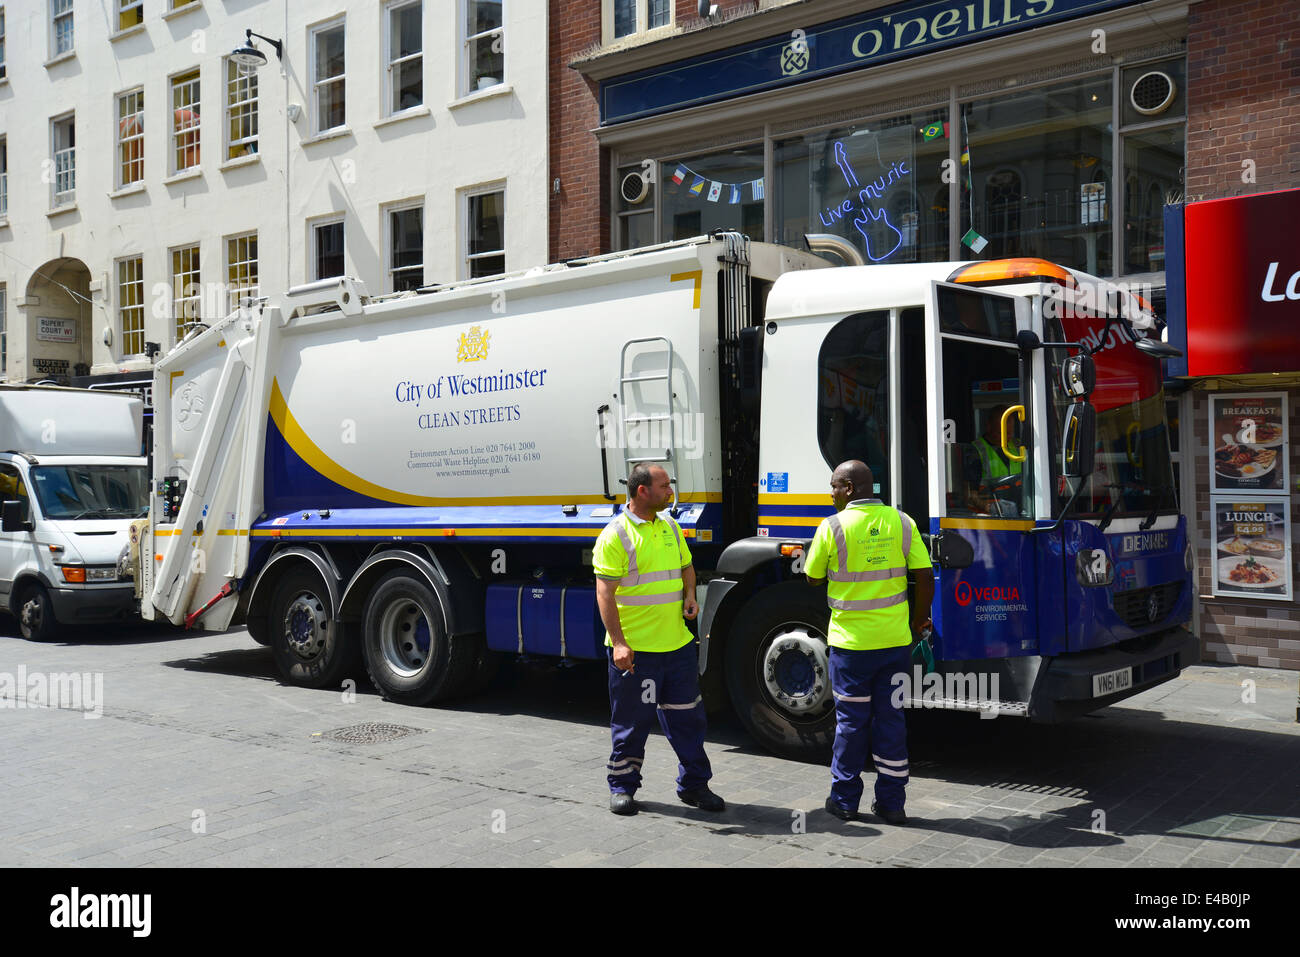 Rubbish truck collection in Wardour Street, Chinatown, West End, City of Westminster, London, England, United Kingdom Stock Photo